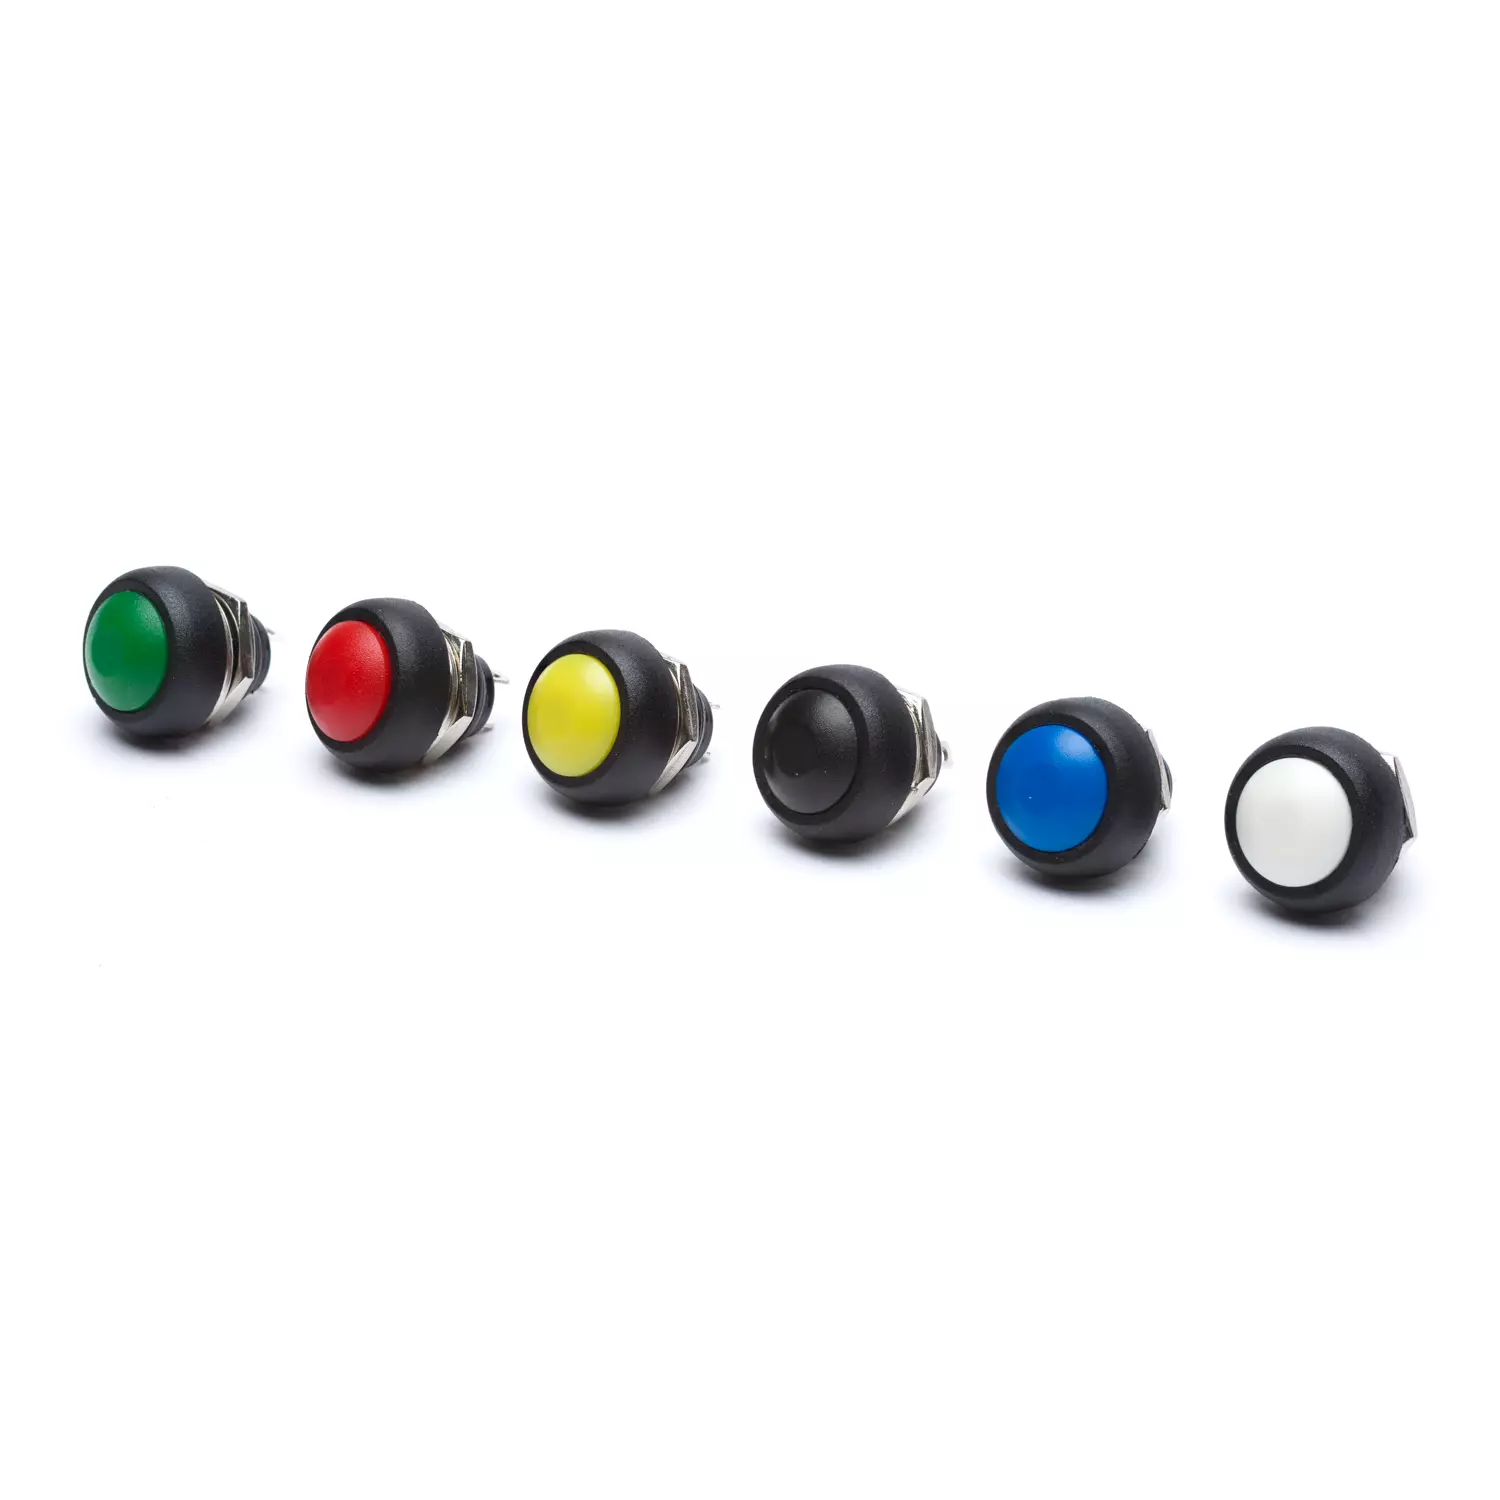 Photo of 12mm Momentary Push Button Dome - Yellow